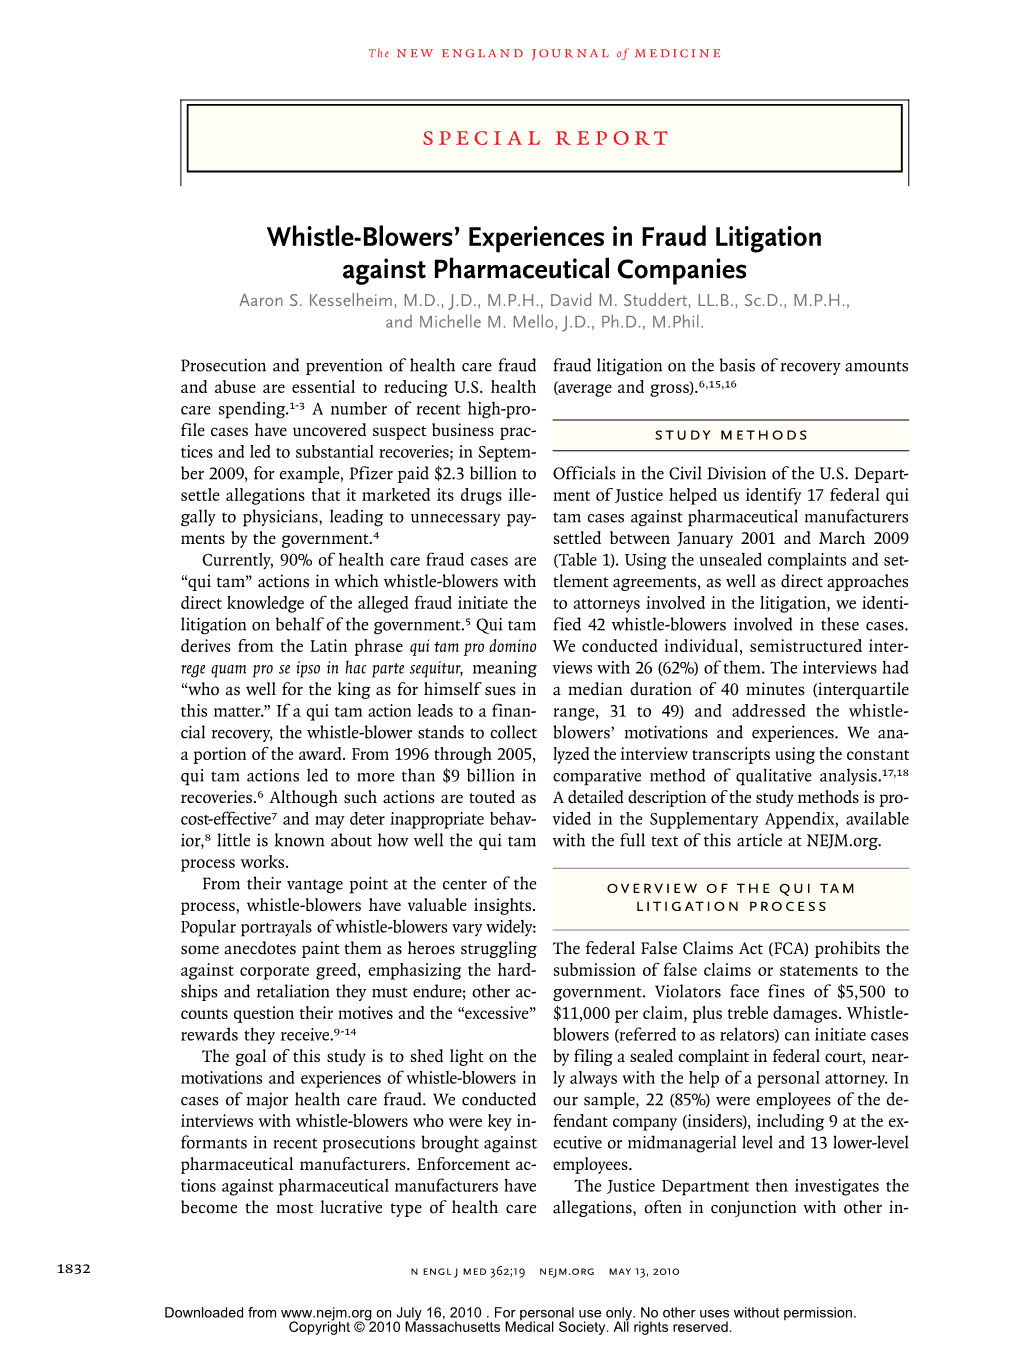 Whistle-Blowers' Experiences in Fraud Litigation Against Pharmaceutical